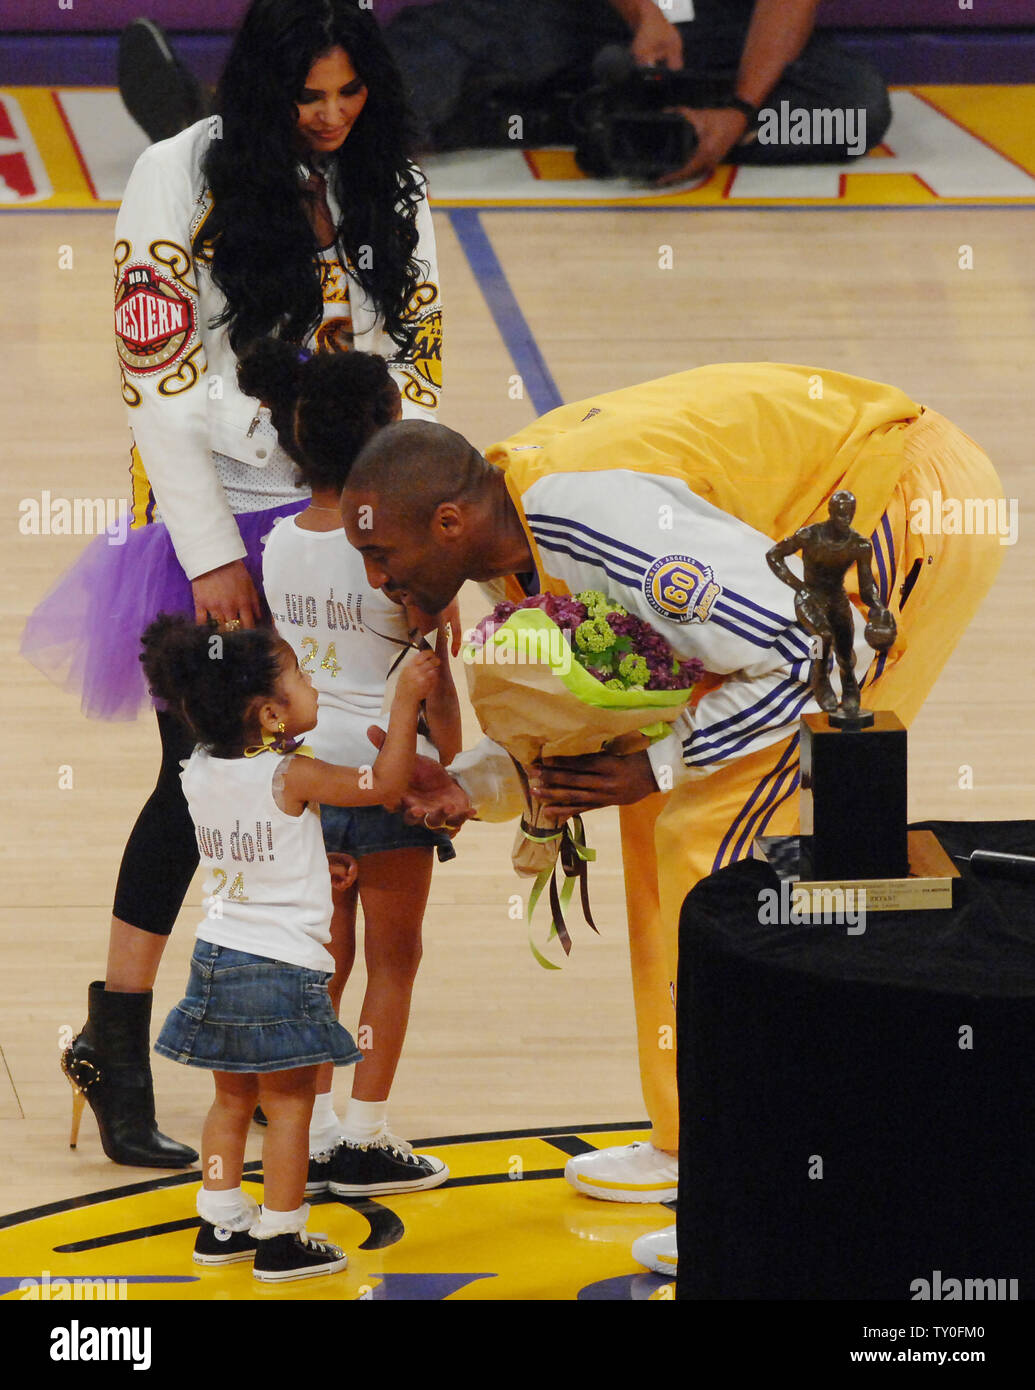 Kobe Bryant's daughter Natalia feels the love as she gears up to throw  first pitch at Dodger Stadium on 'Lakers Night